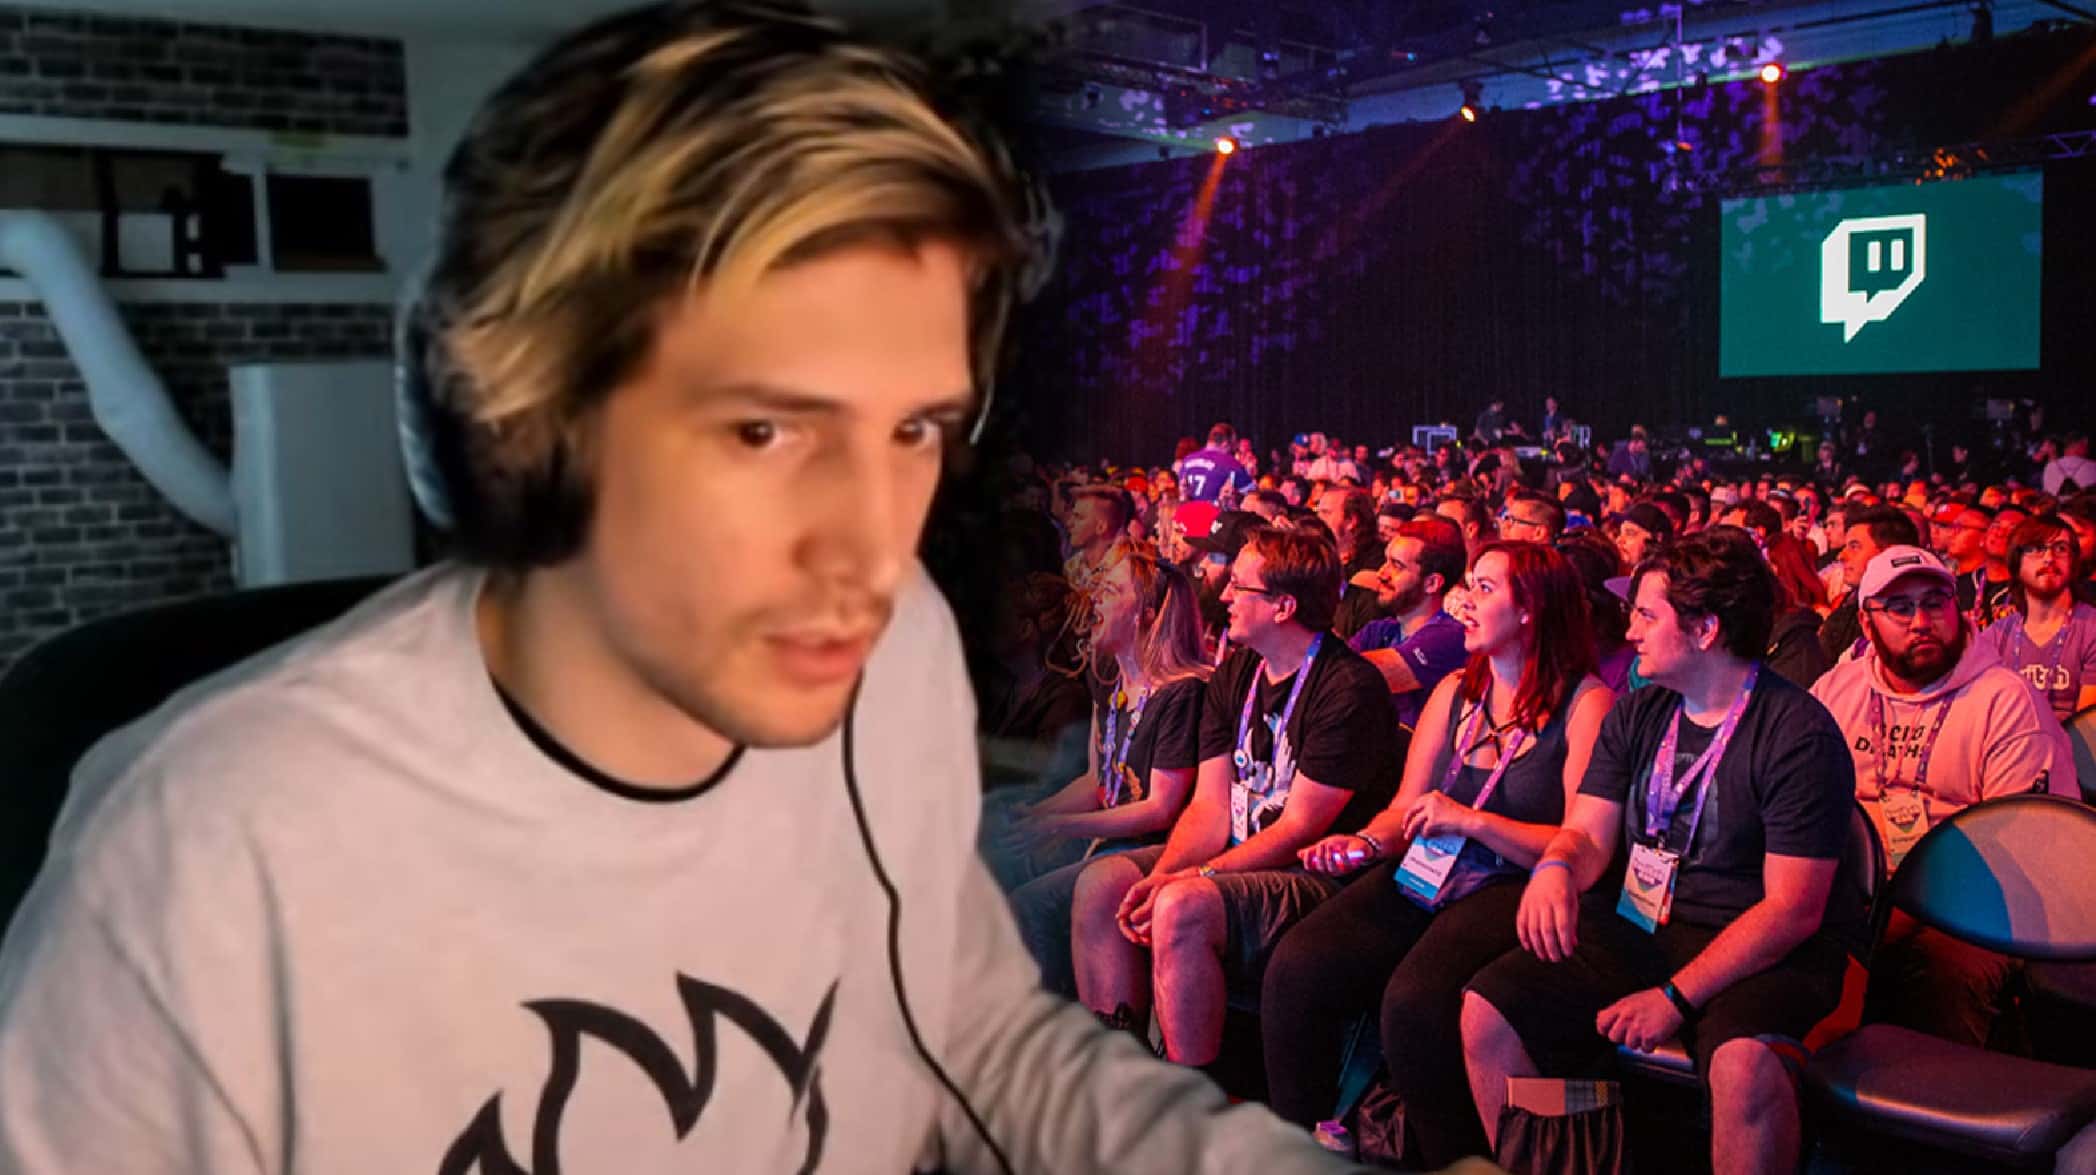 xqc discussing TwitchCon